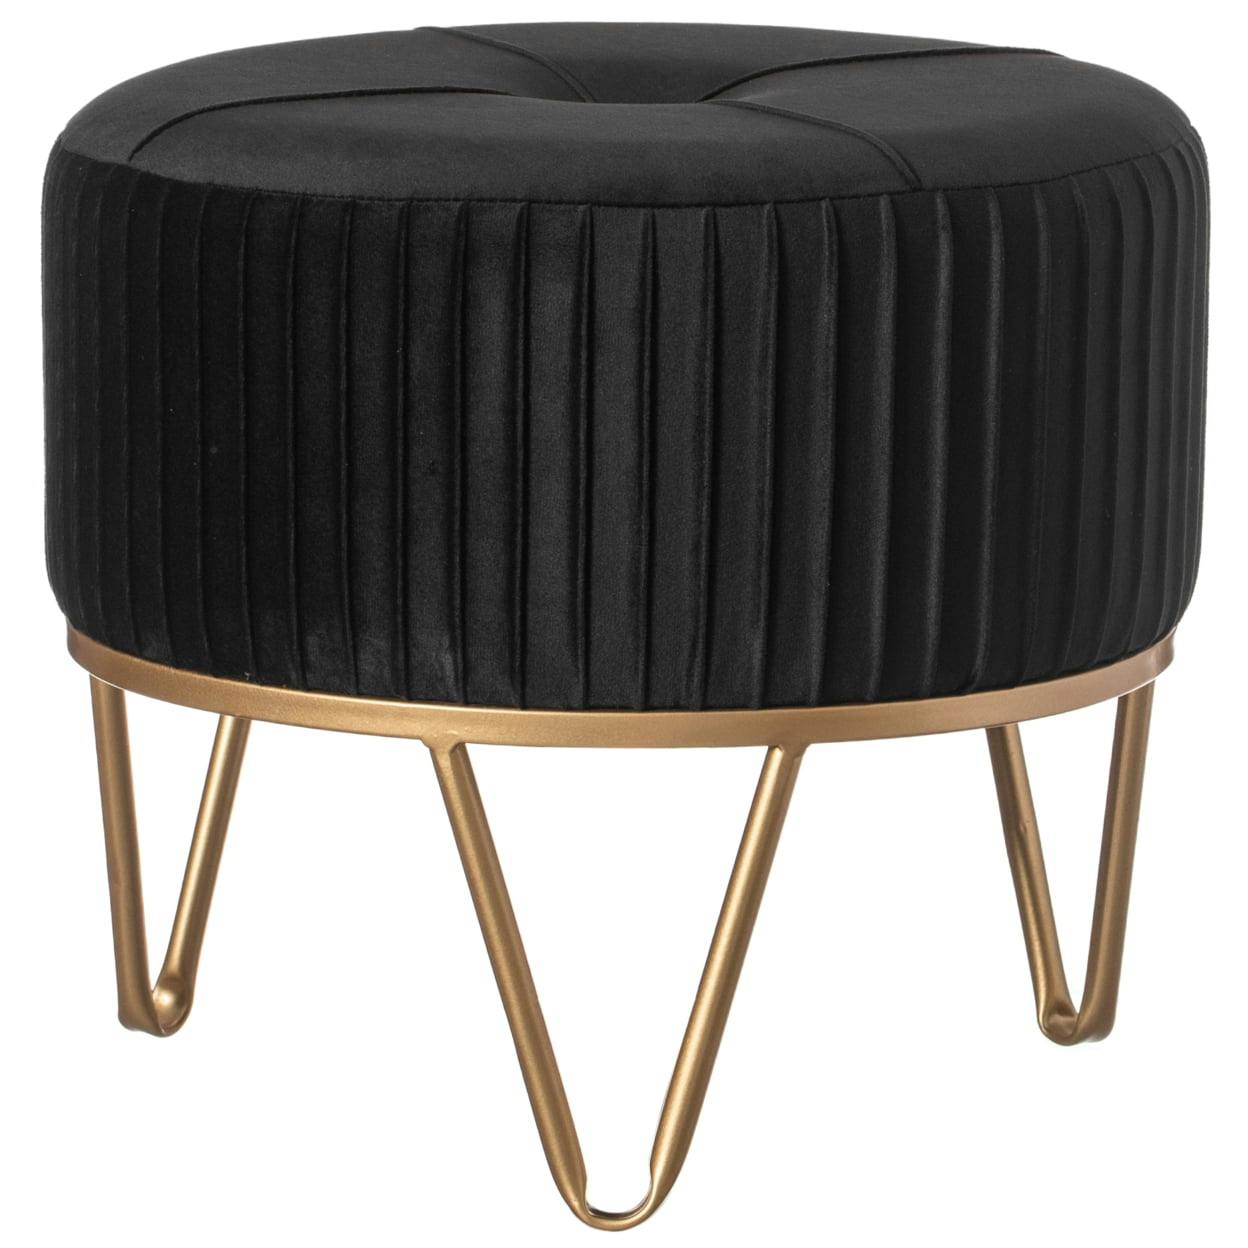 Large Round Black Velvet Ottoman with Gold Hairpin Legs